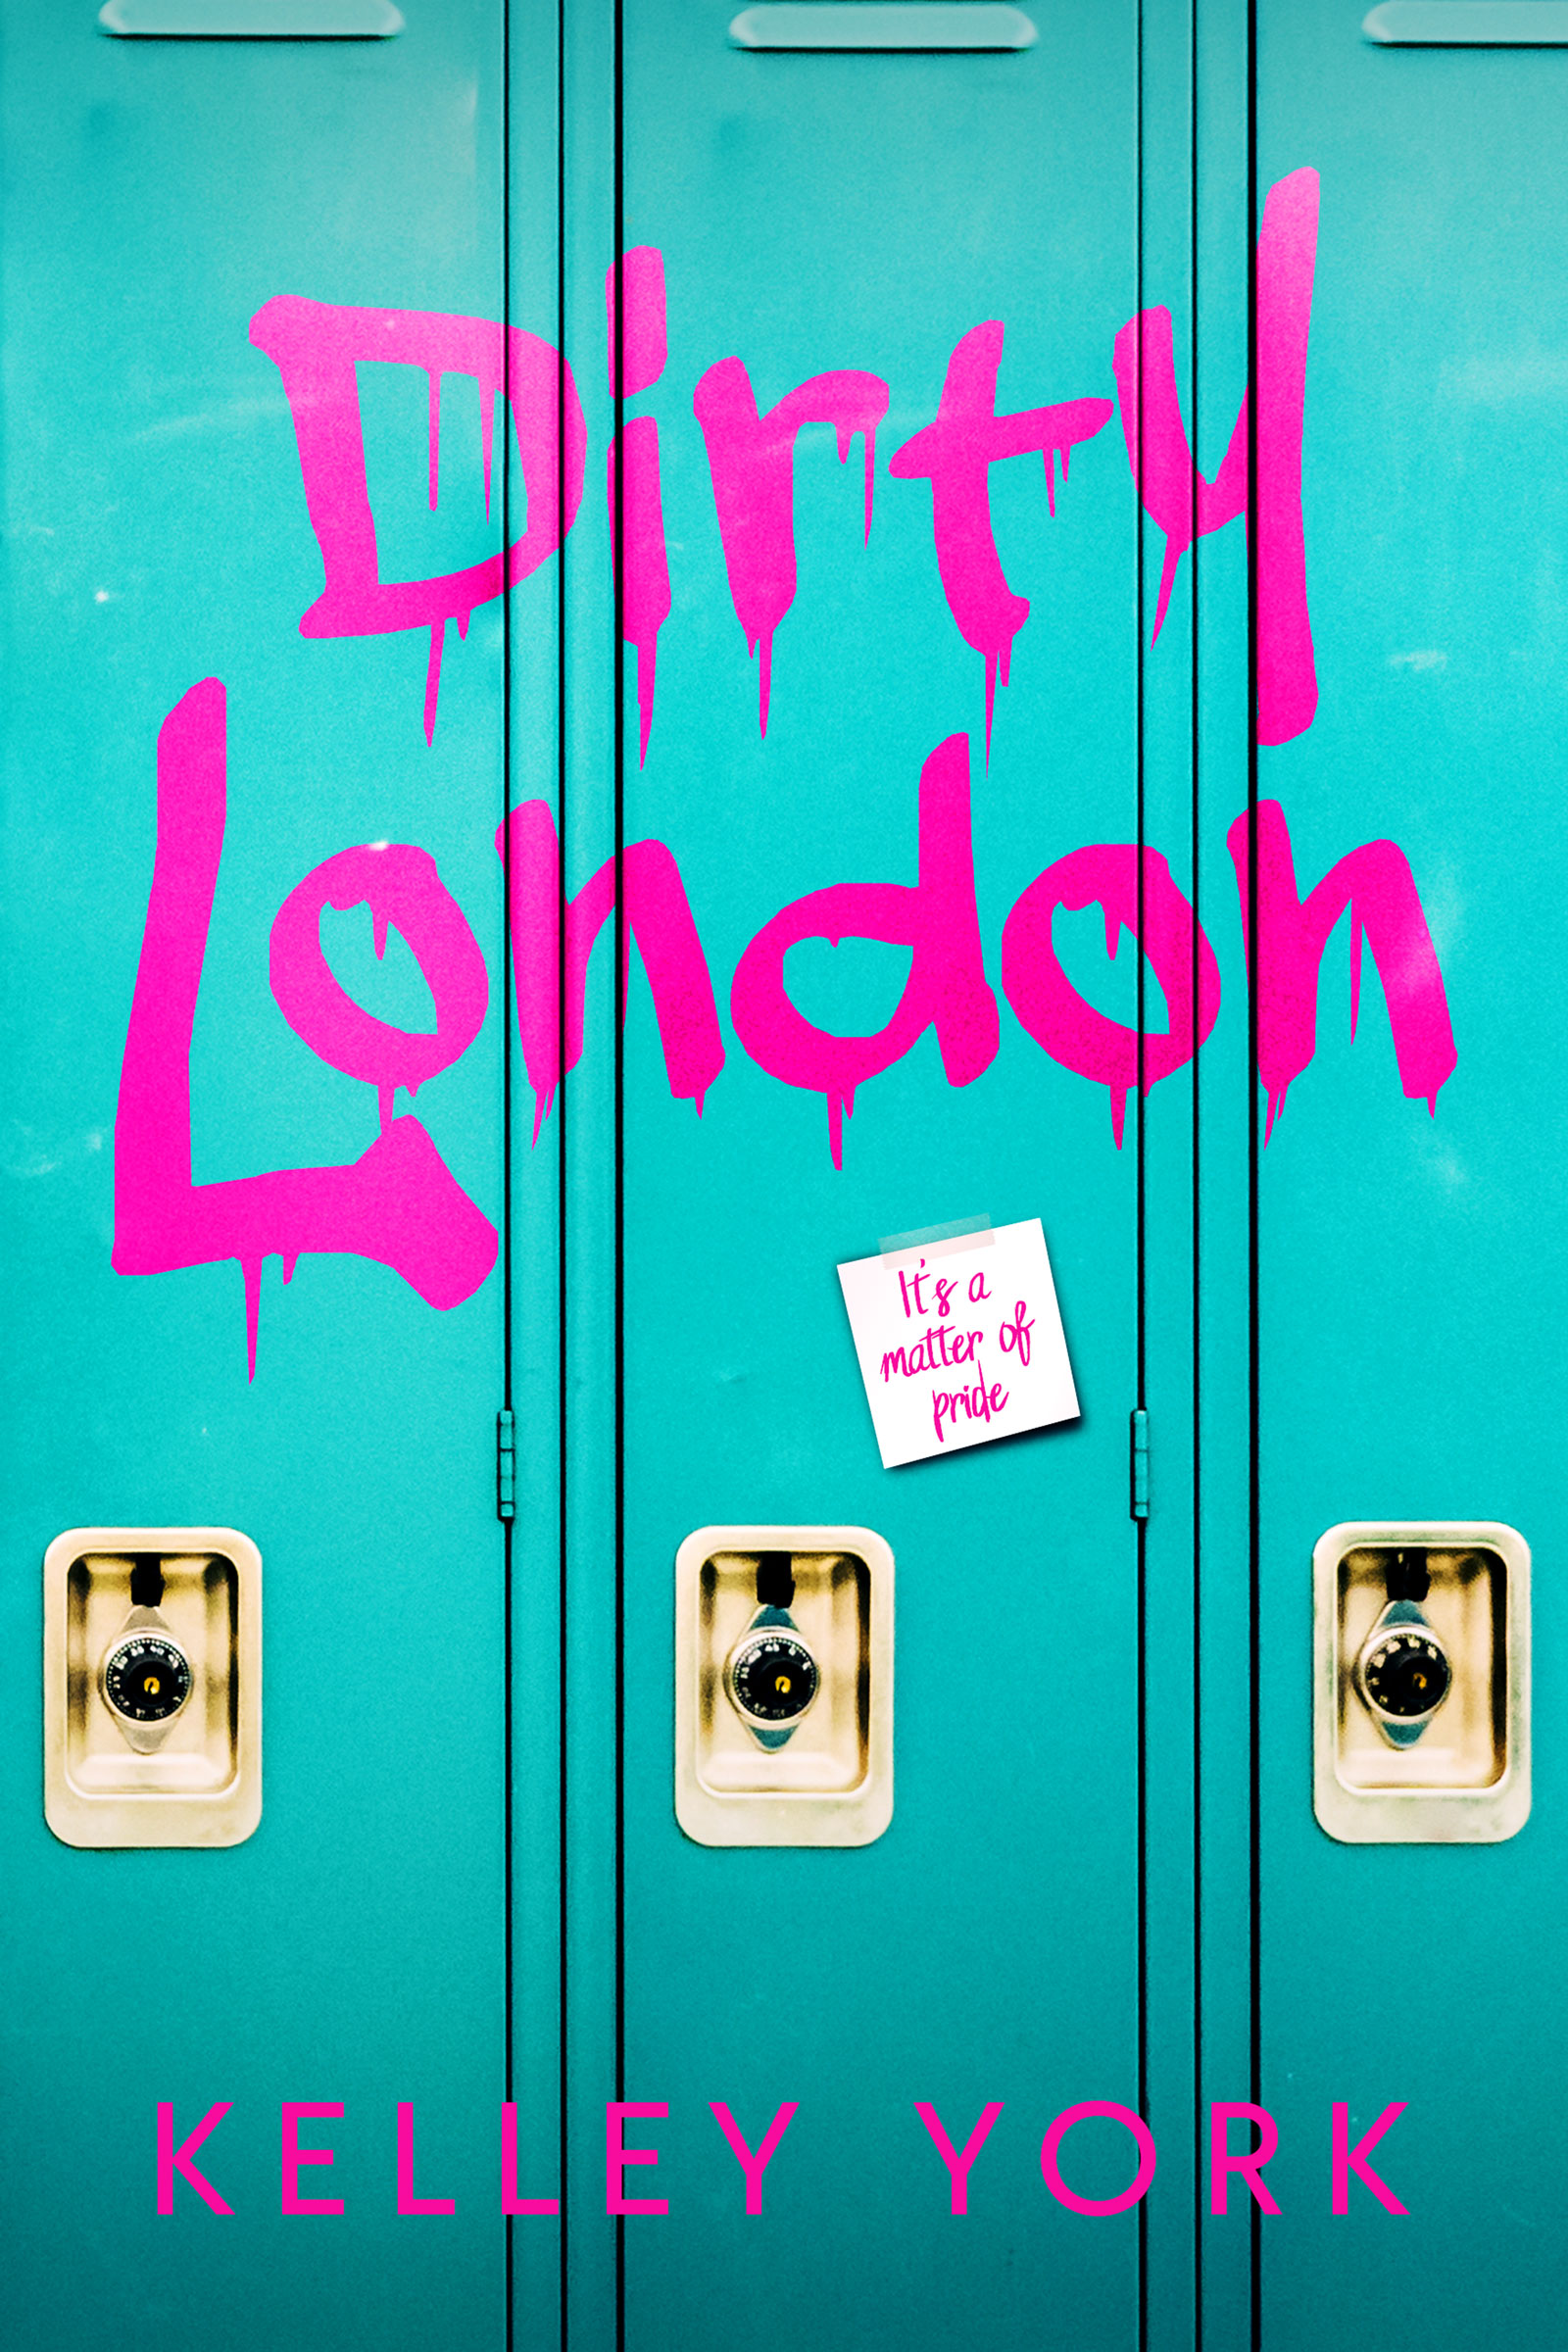 Book cover for Dirty London by Kelley York, featuring a set of school lockers with the title spray painted across them